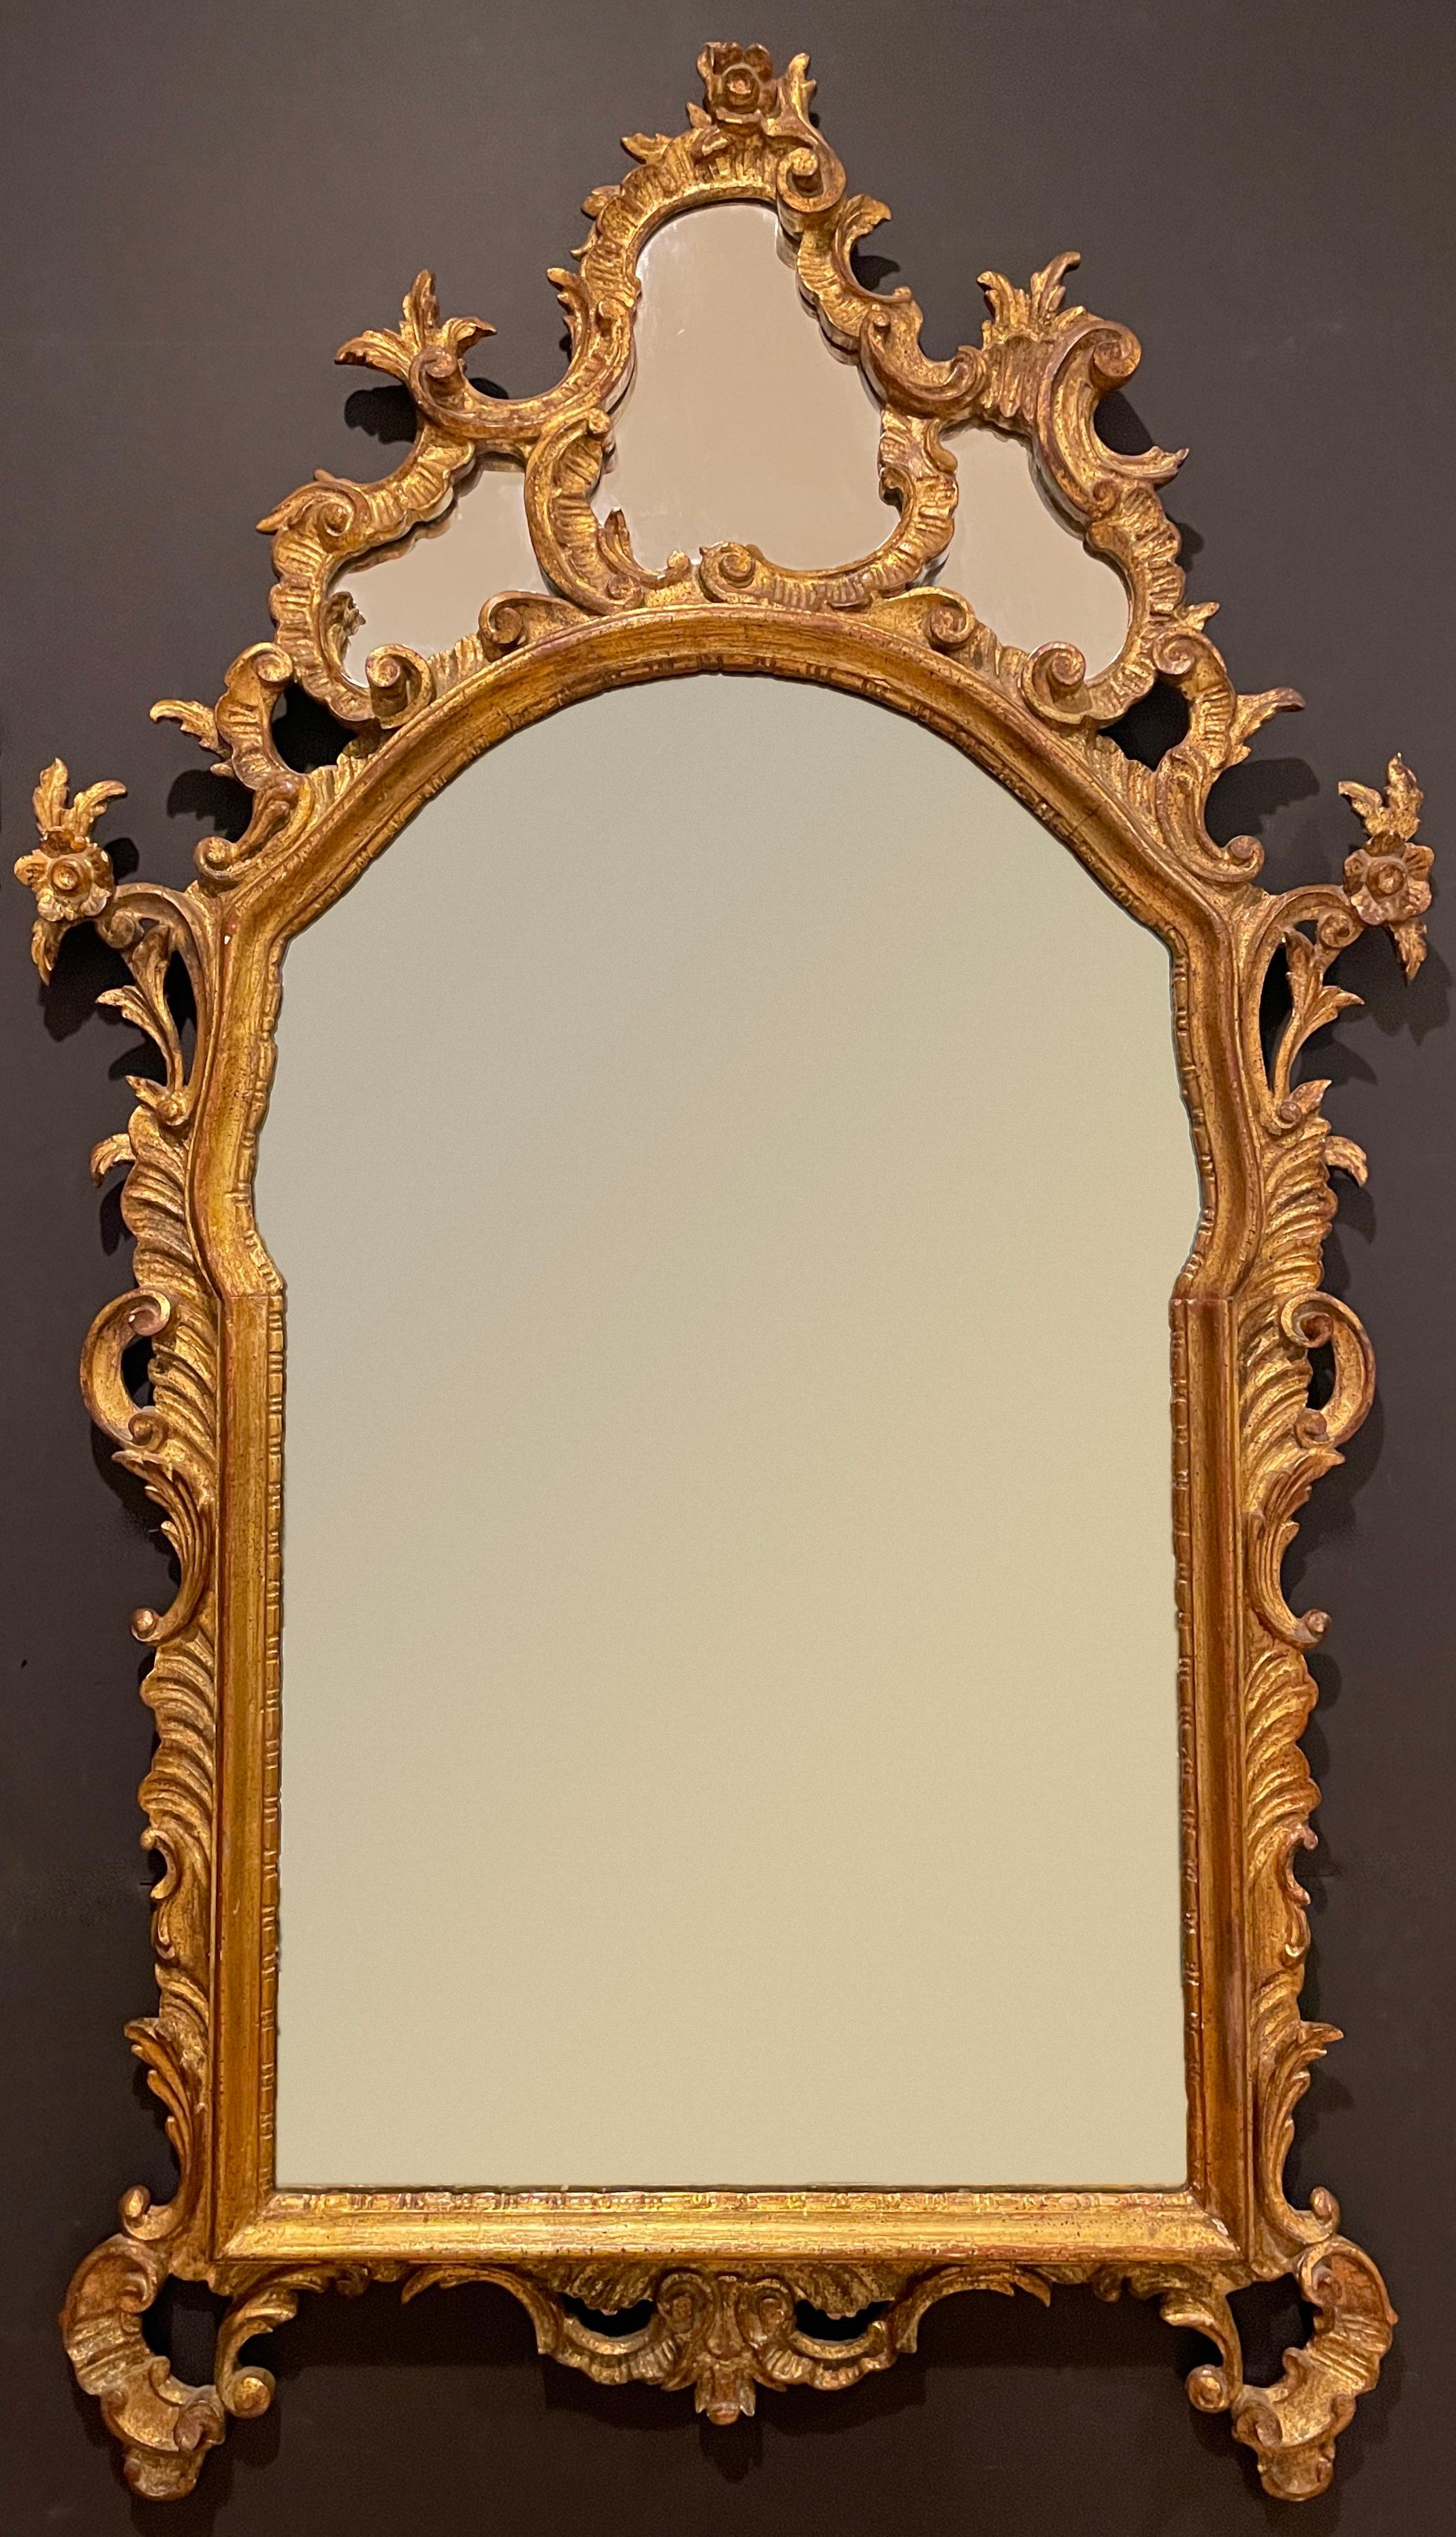 Finely carved giltwood Baroque style mirror with main mirrored panel and three mirrored panels at crest. Carved with scrolls and florals in the Baroque styling.